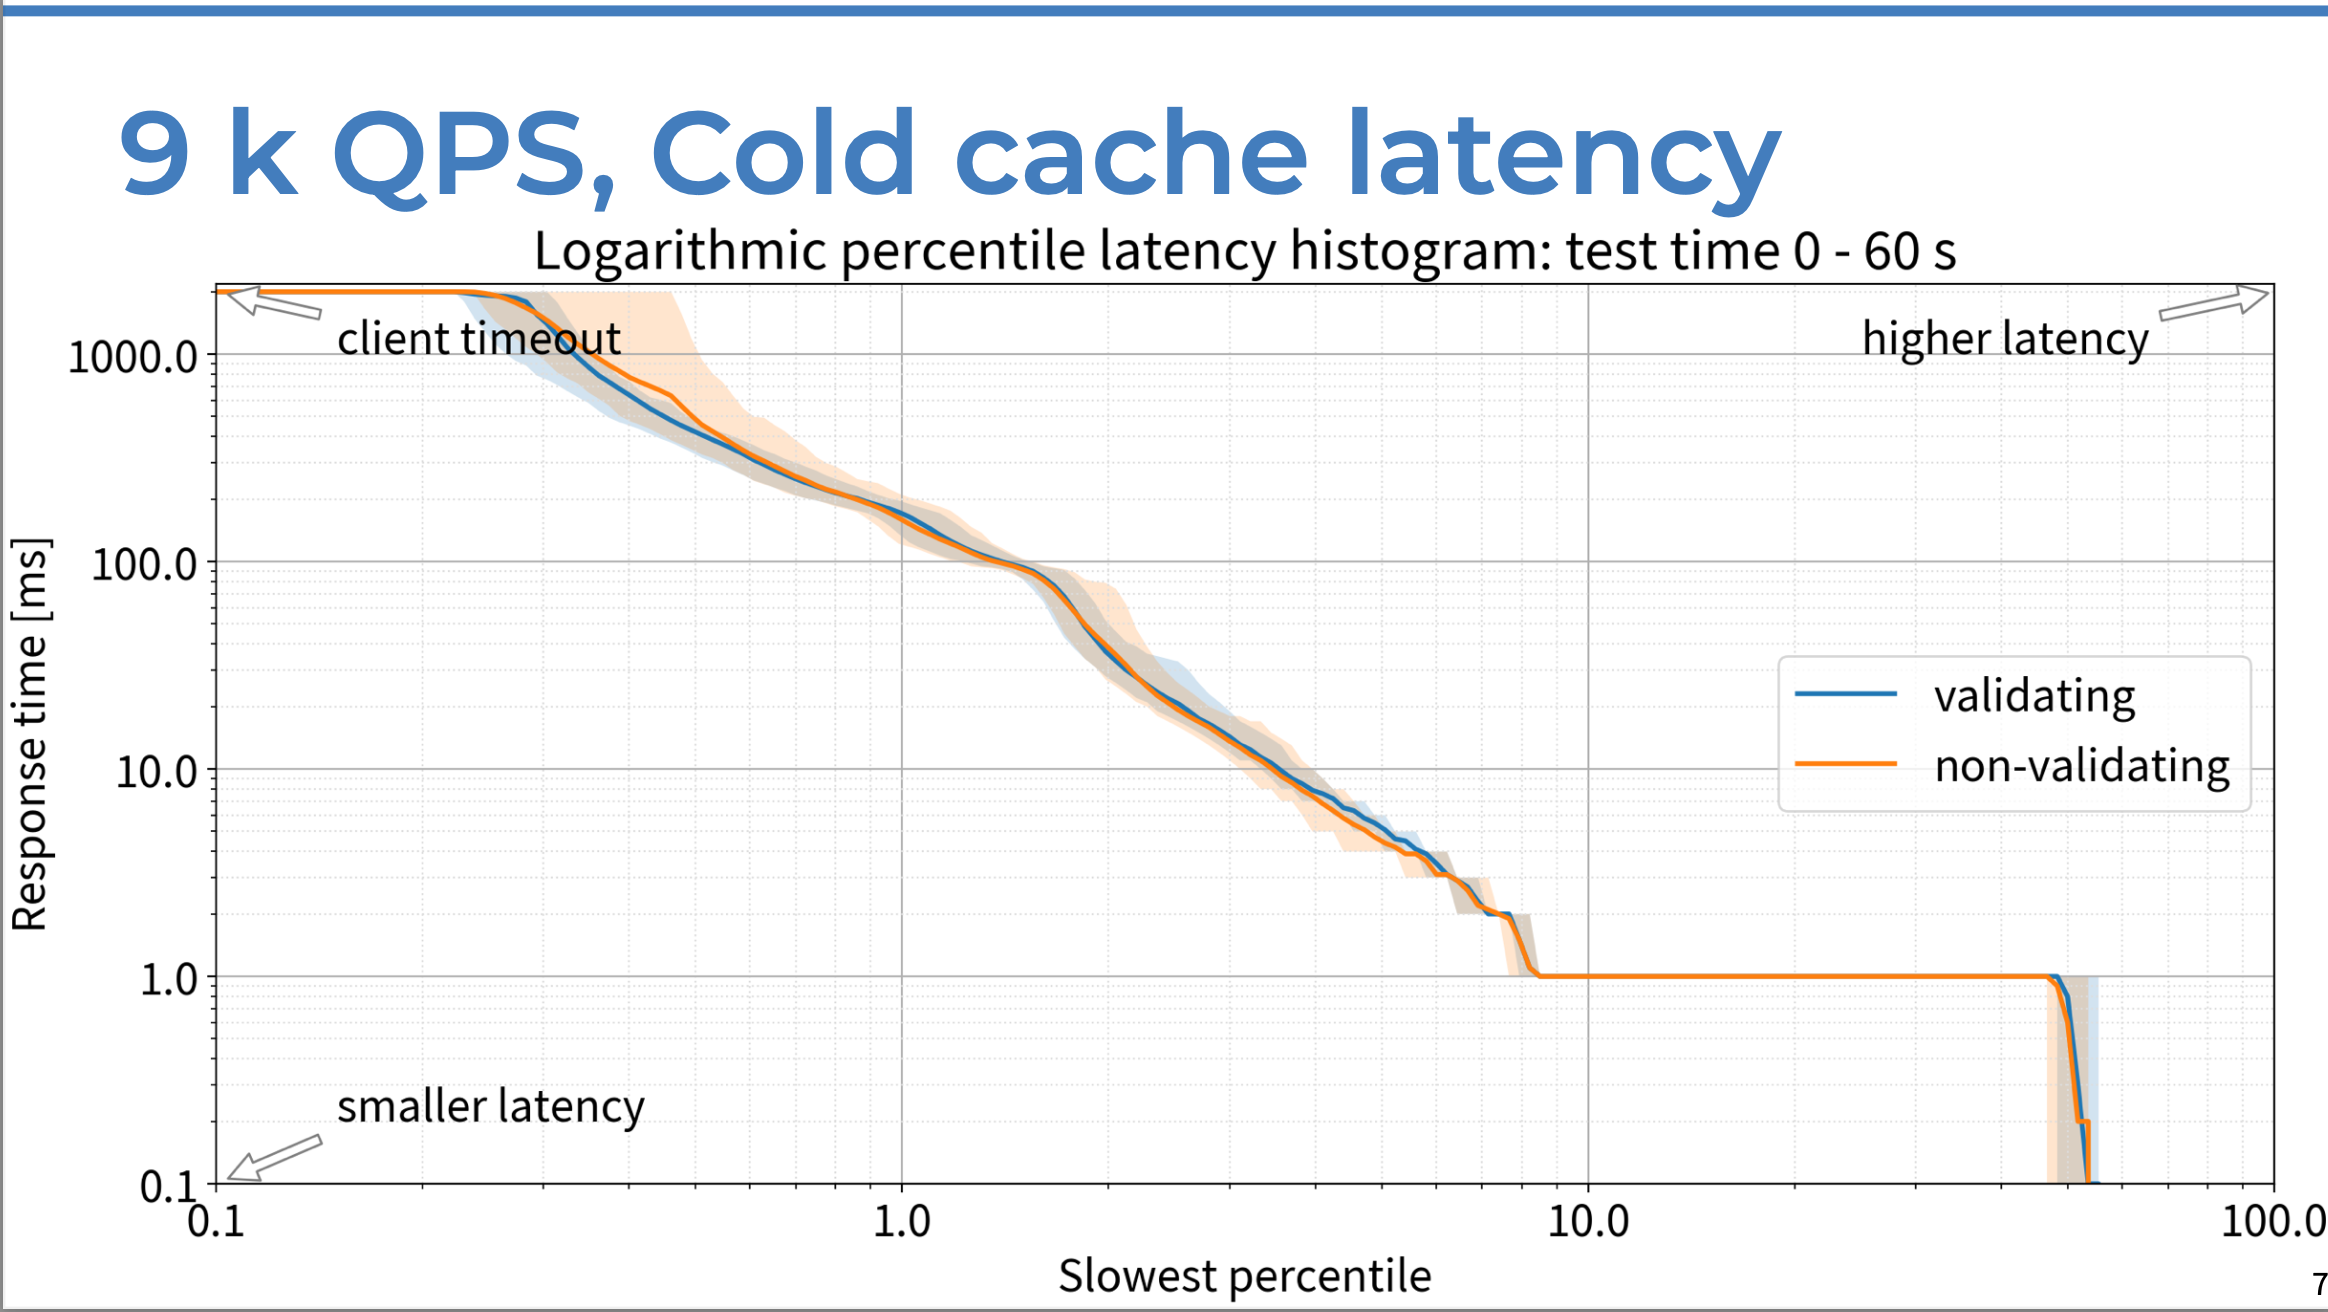 Logorithmic percentile latency histogram of response time (in ms) vs. slowest percentile of responses, comparing DNSSEC-validating resolver response to non-validating server response with 9K QPS and a cold cache.